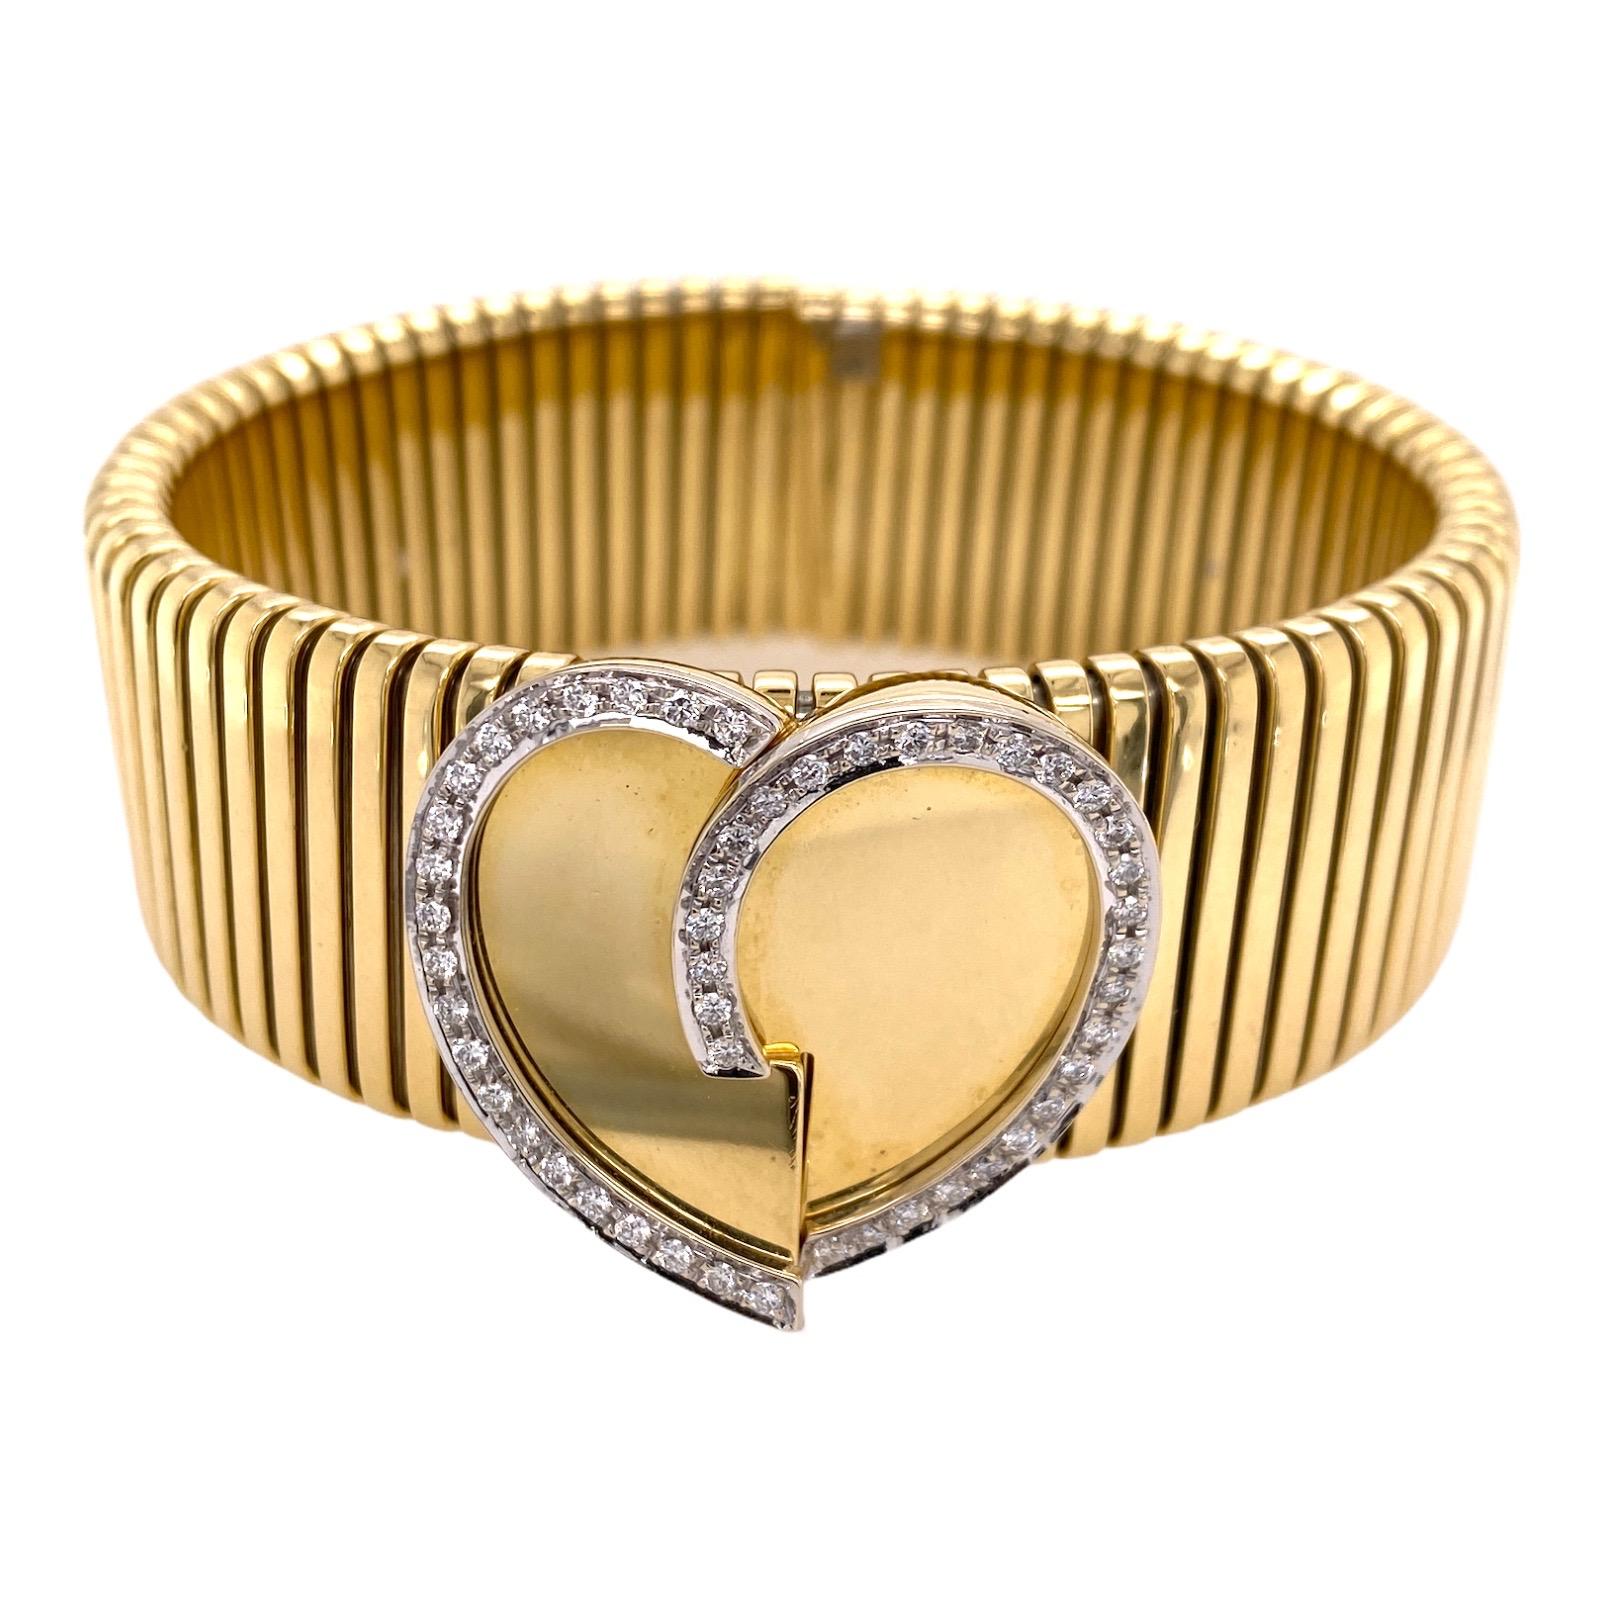 Italian flexible ribbed bangle bracelet fashioned in 18 karat yellow gold. The bangle features a gold heart outlined in round brilliant cut diamonds weighing approximately .50 carat total weight. The diamonds are graded G-H color and VS clarity. The